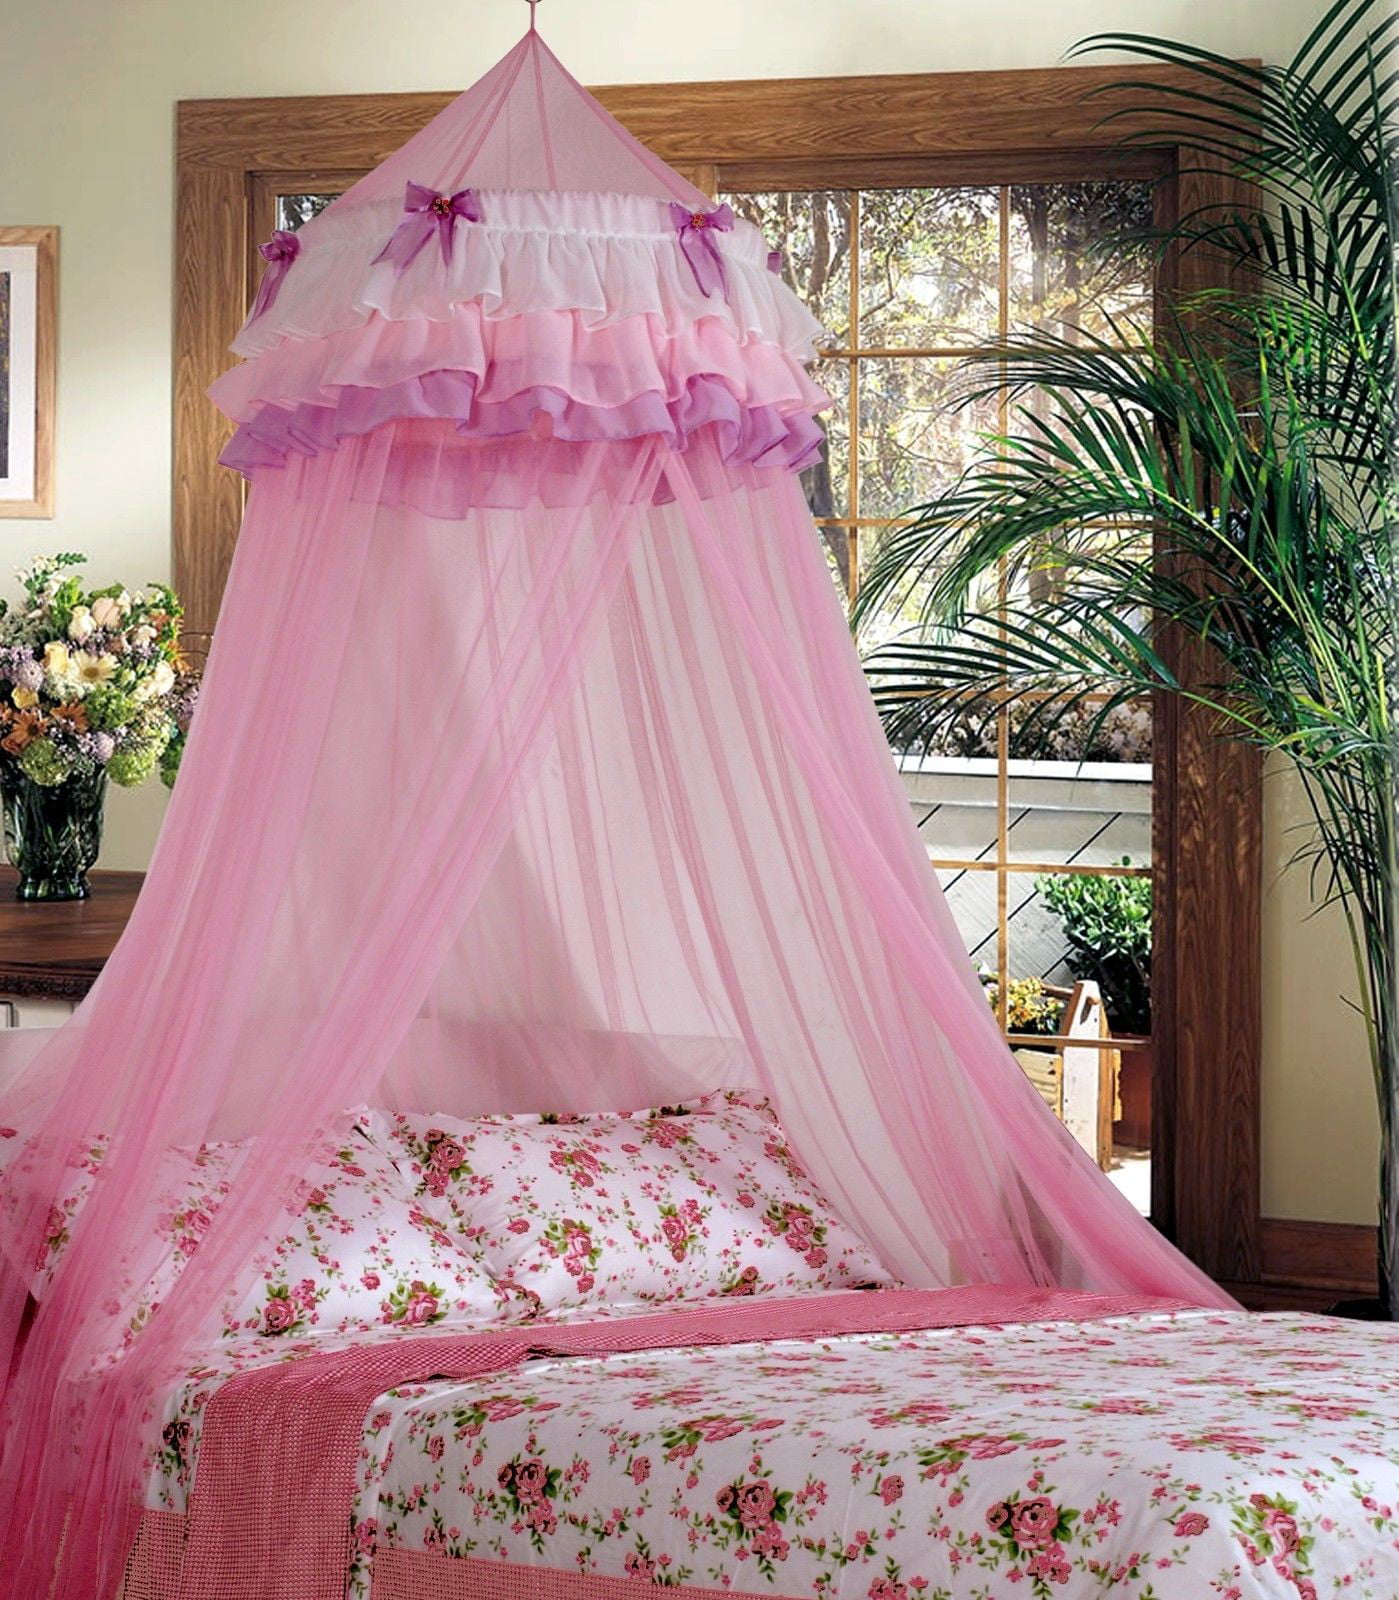 Elegant Round Dome Lace Princess Bed Mosquito Netting Mesh Canopy Bedding Net 